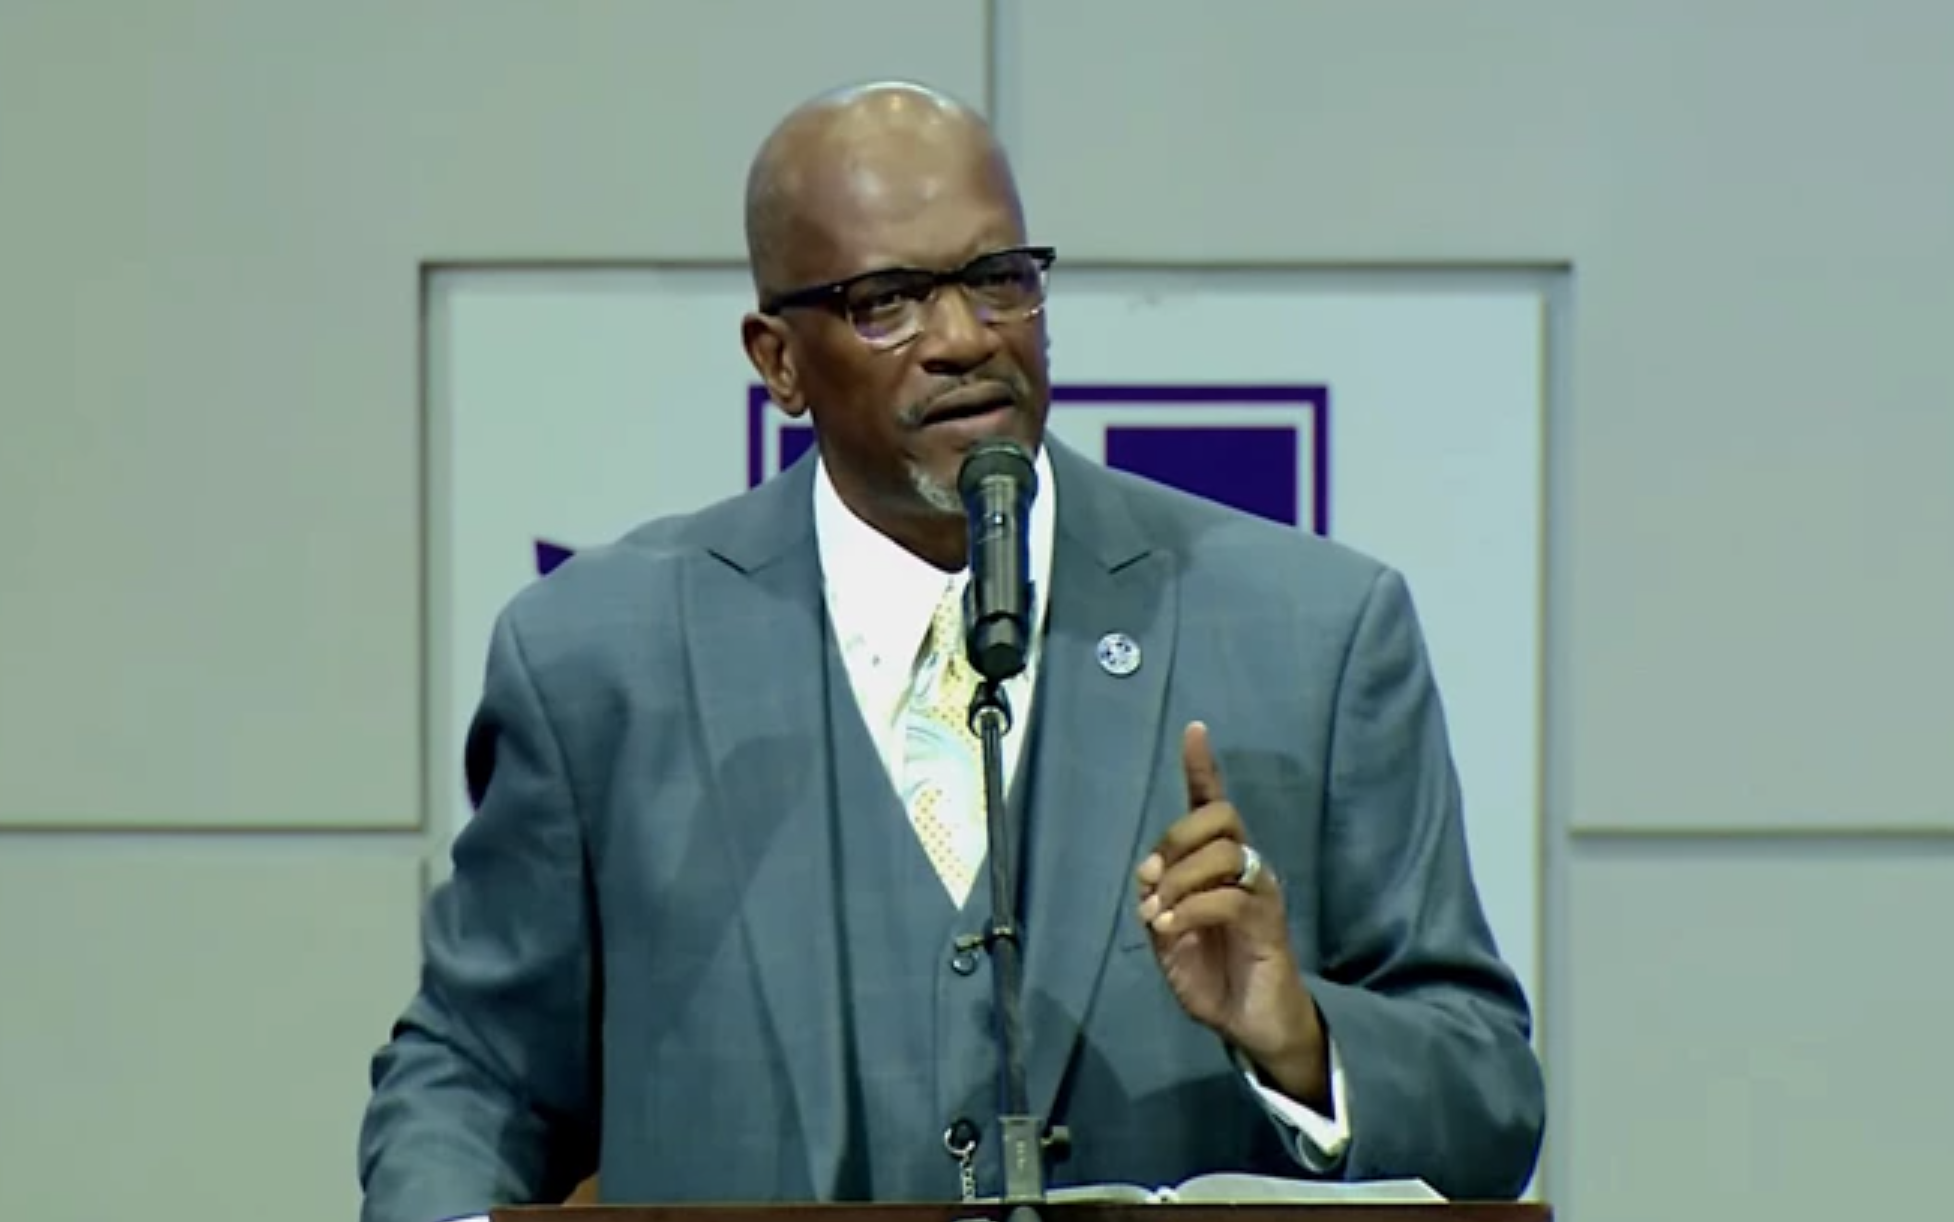 Pastor Terry K. Anderson